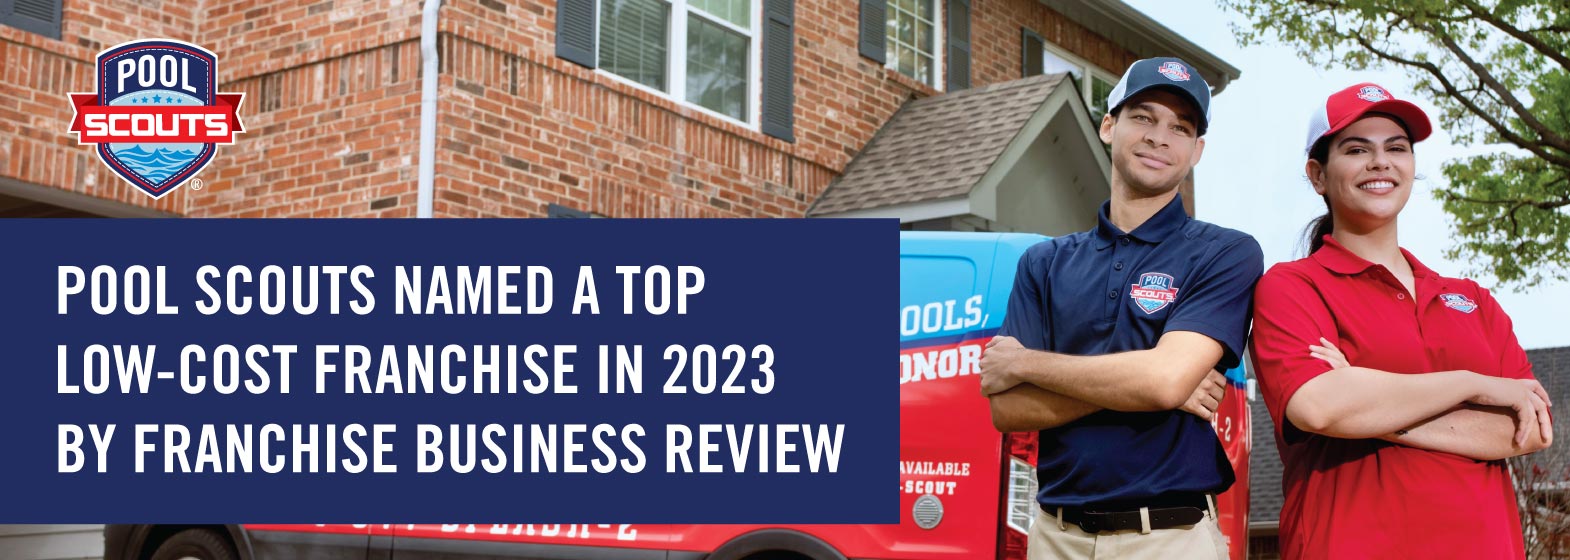 Image of Pool Scouts Named a Top Low-Cost Franchise in 2023 by Franchise Business Review